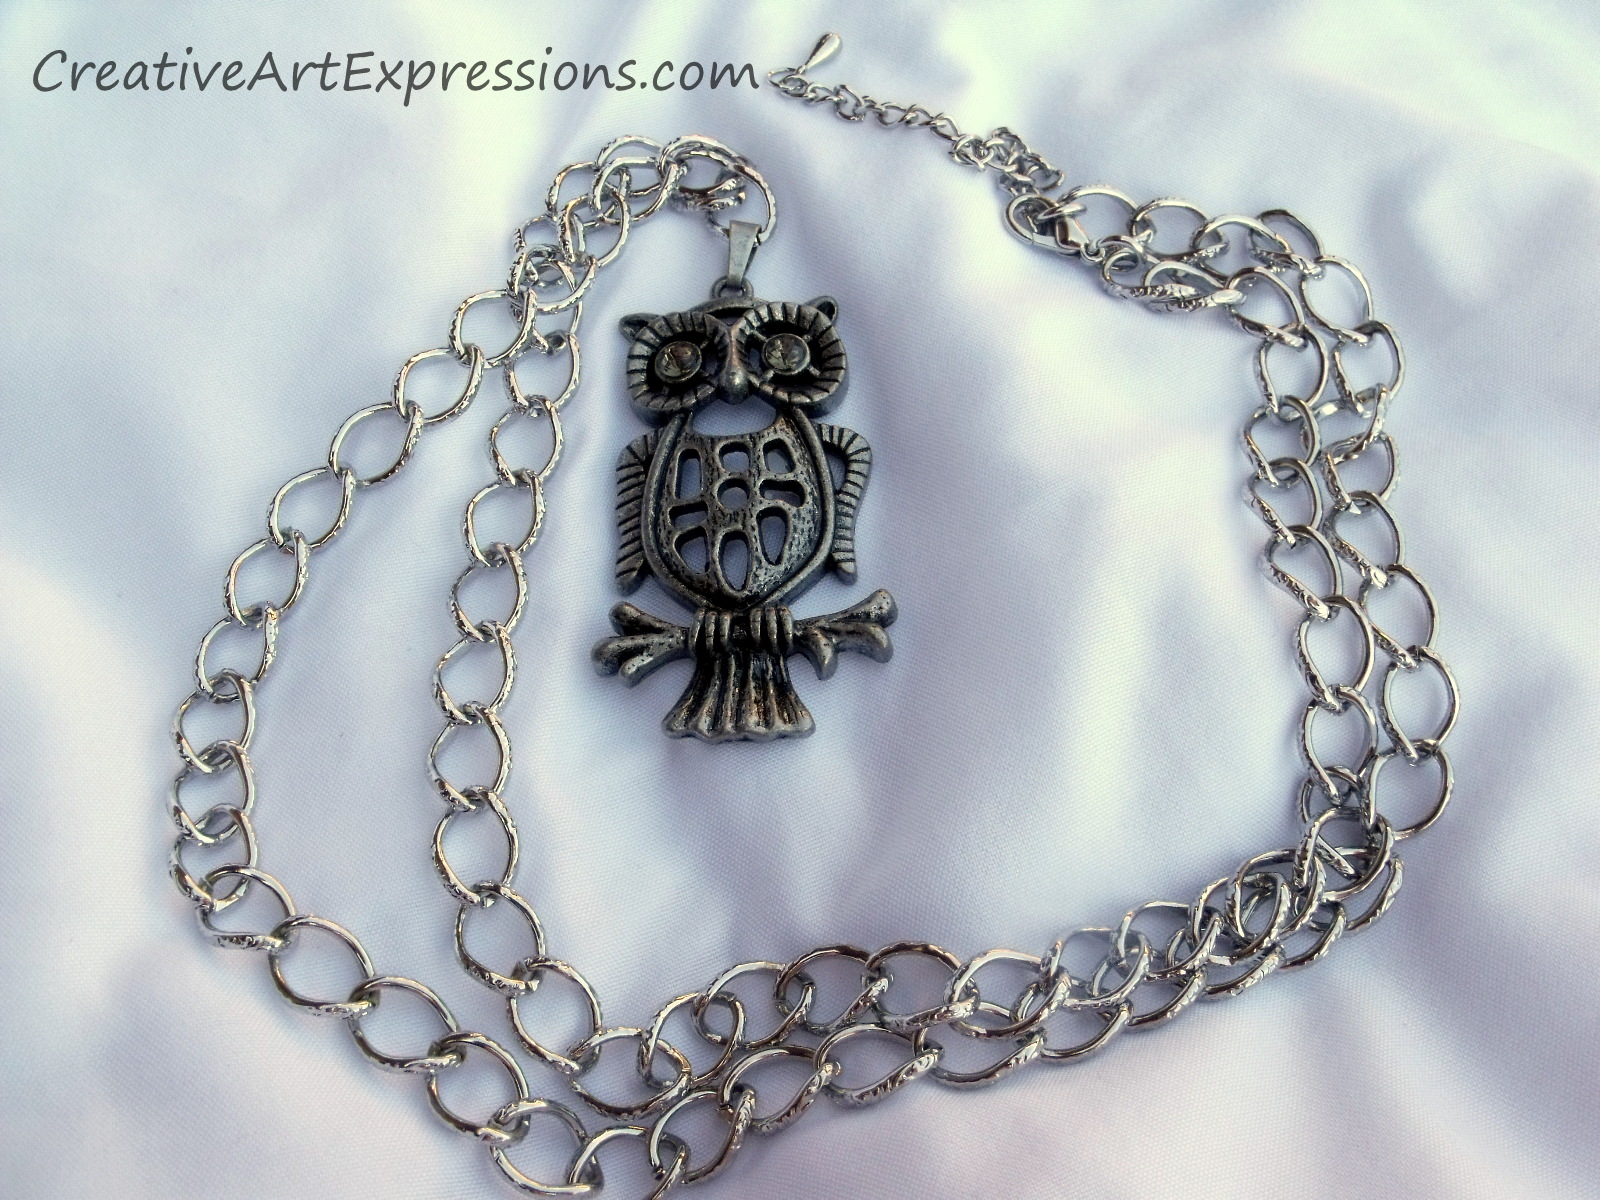 Creative Art Expressons Handmade Silver Owl Necklace Jewelry Design